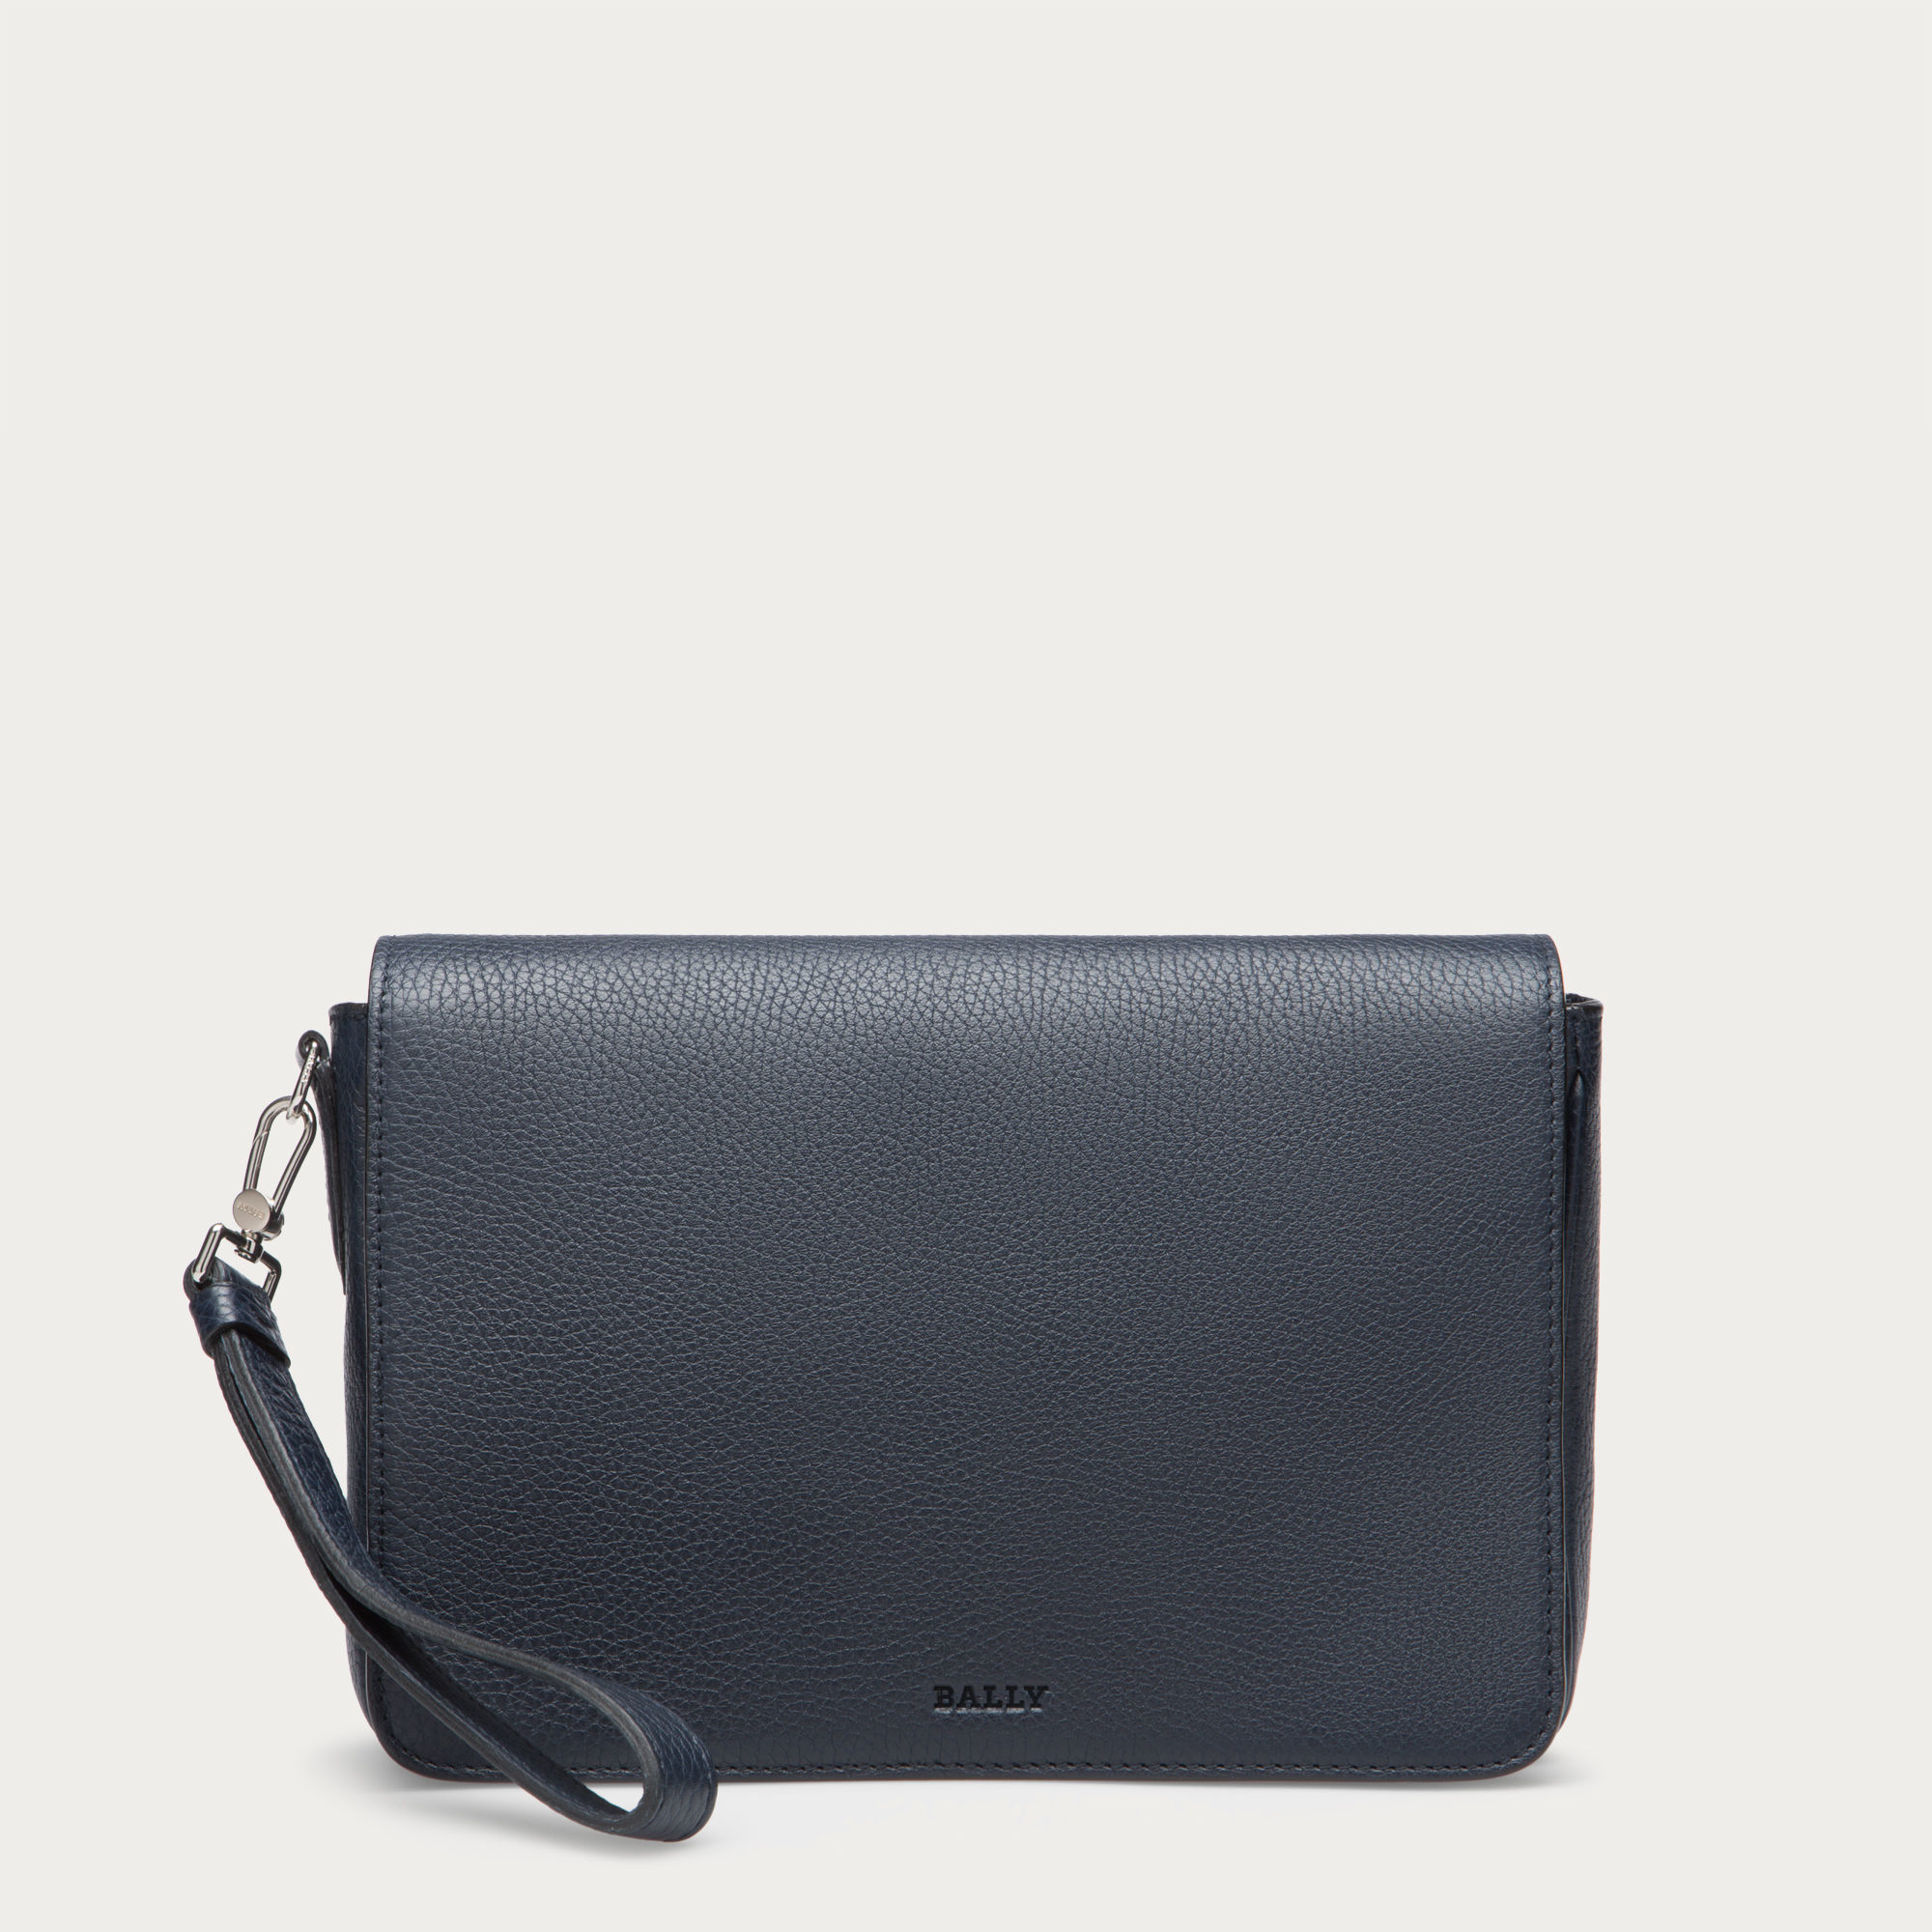 Lyst - Bally Steon Men ́s Grained Leather Clutch Bag In Ink in Blue